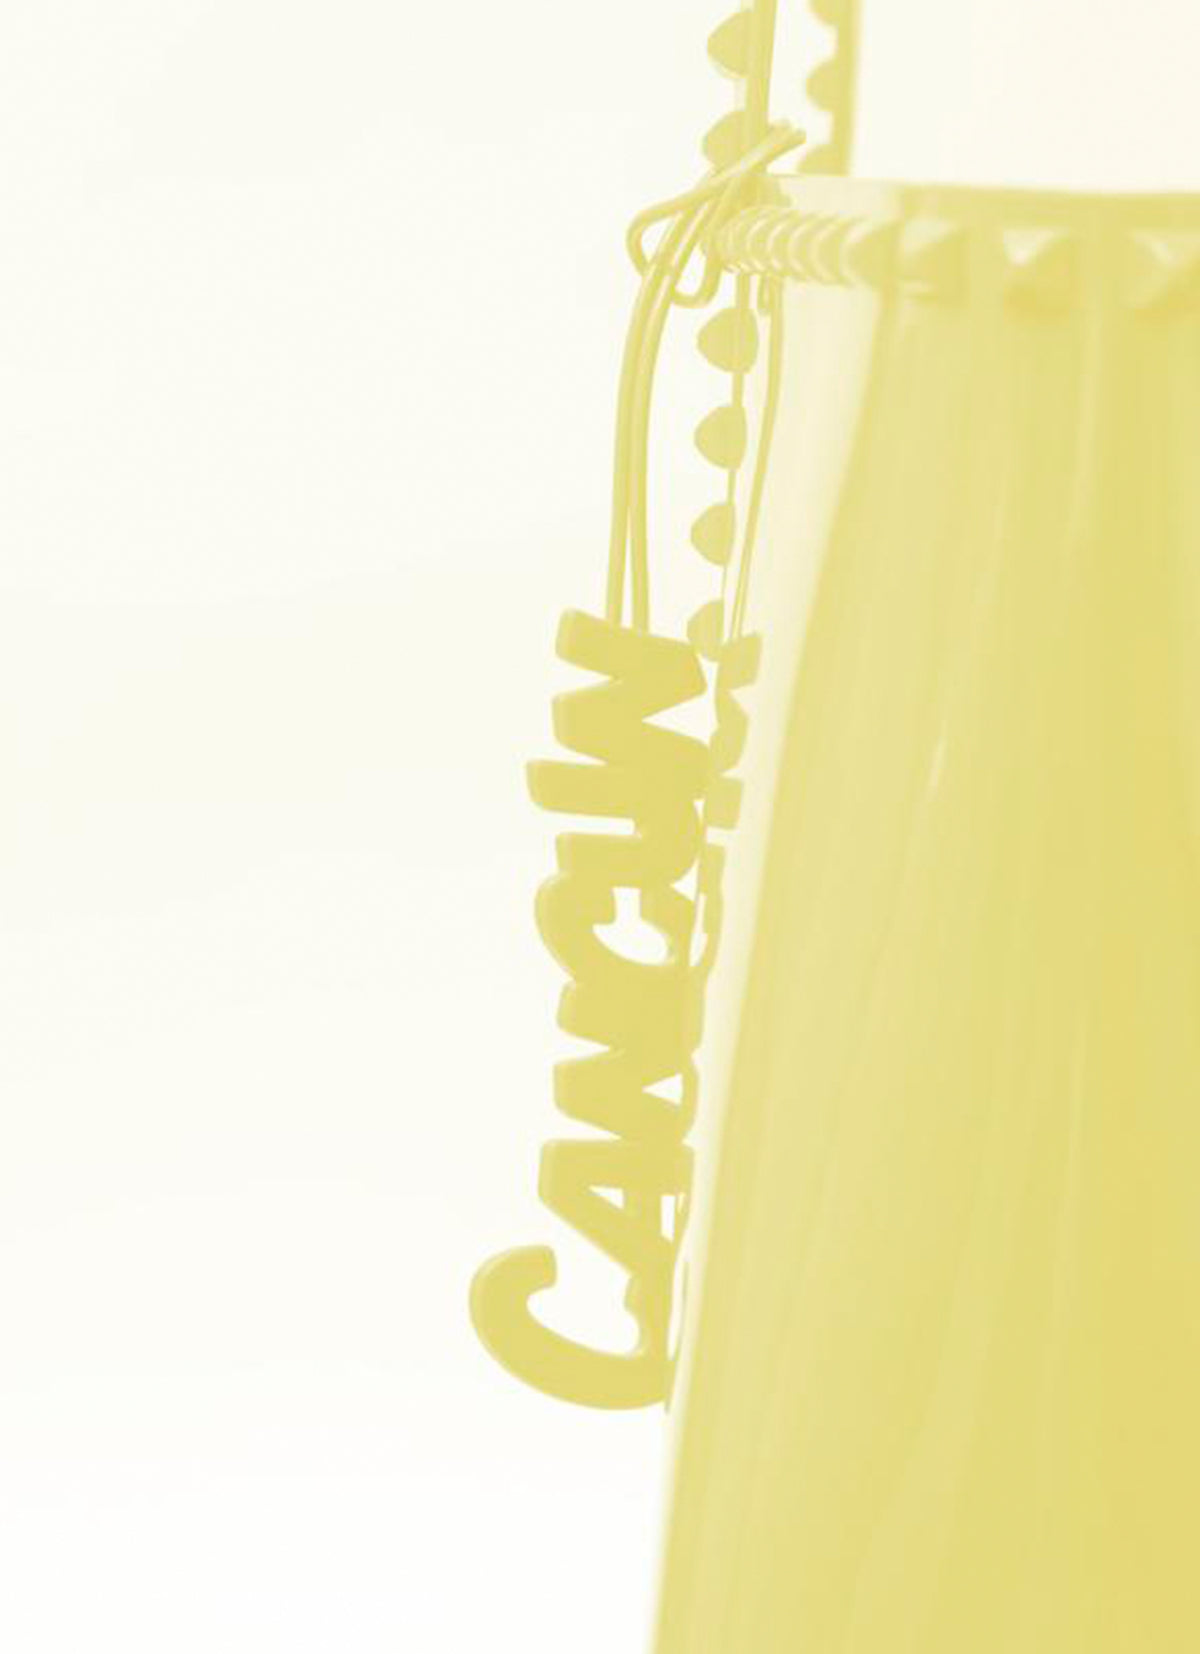 Baby yellow Cancun jelly charms for purses on sale perfect for all bags and purses